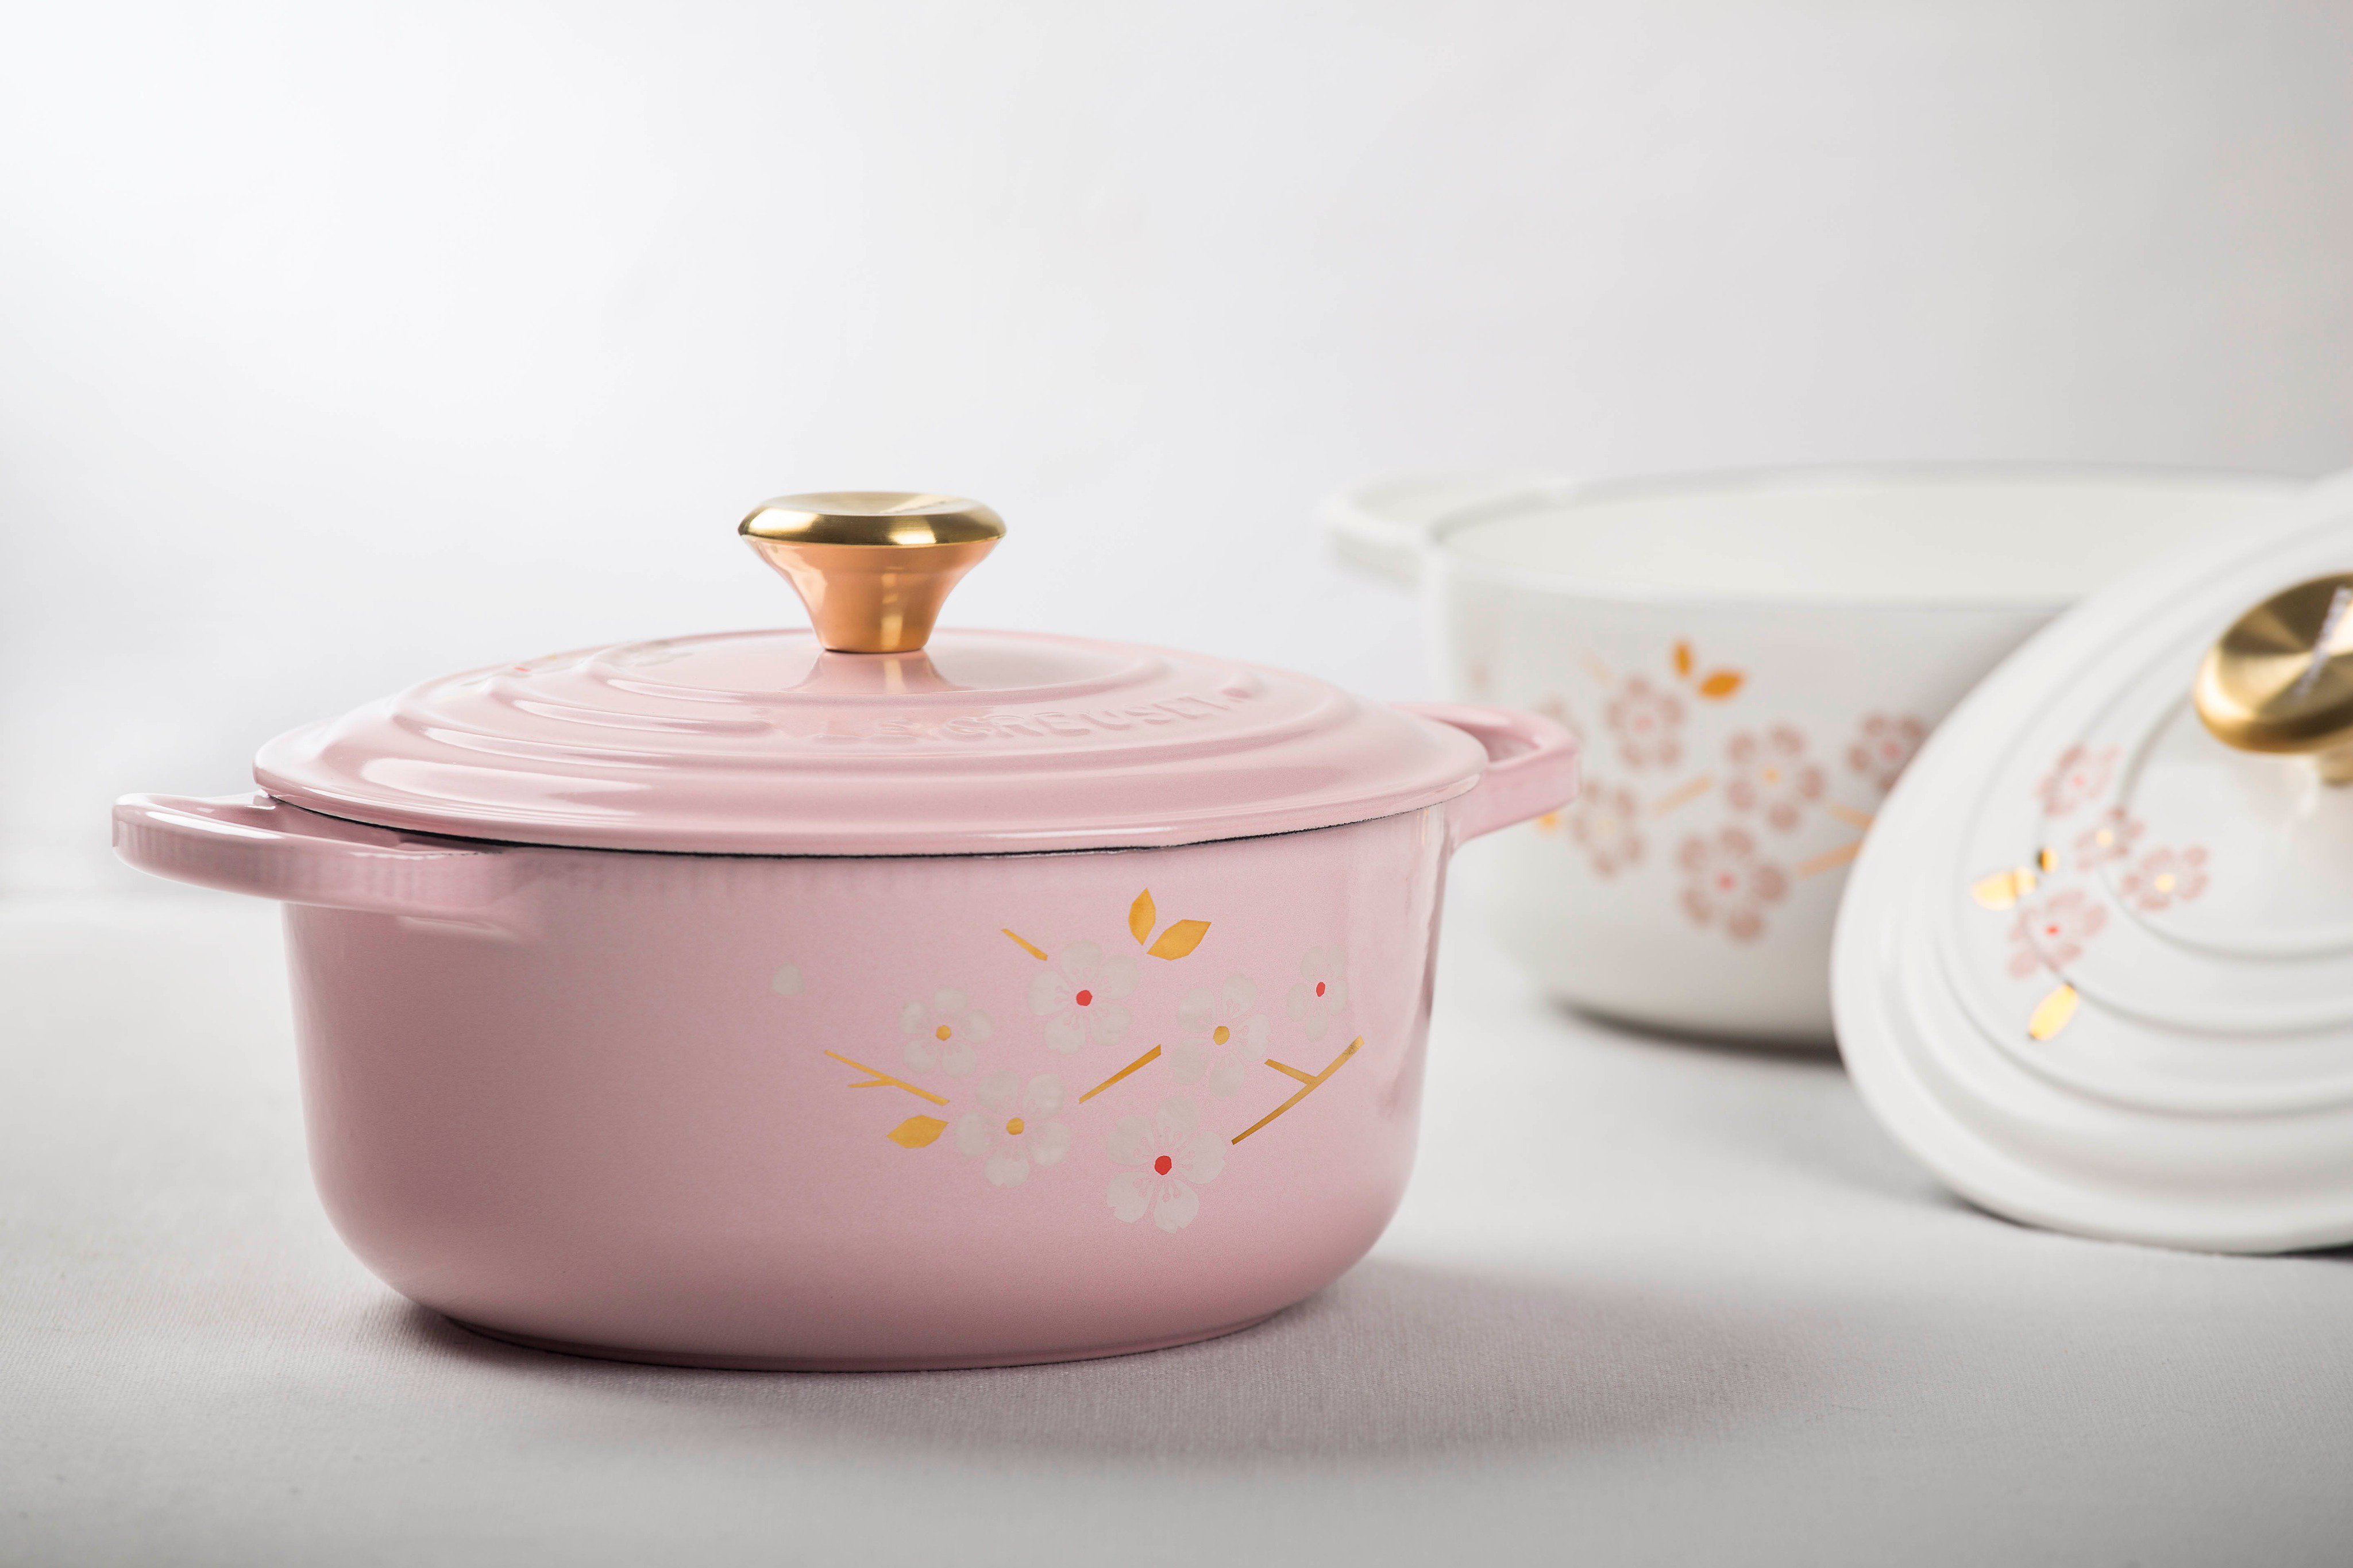 Le Creuset on Twitter: "Bonjour, Spring! Our new hand-appliqued cherry blossom collection is full bloom https://t.co/A8QmcCkuee https://t.co/hhhZpviM0E" / Twitter